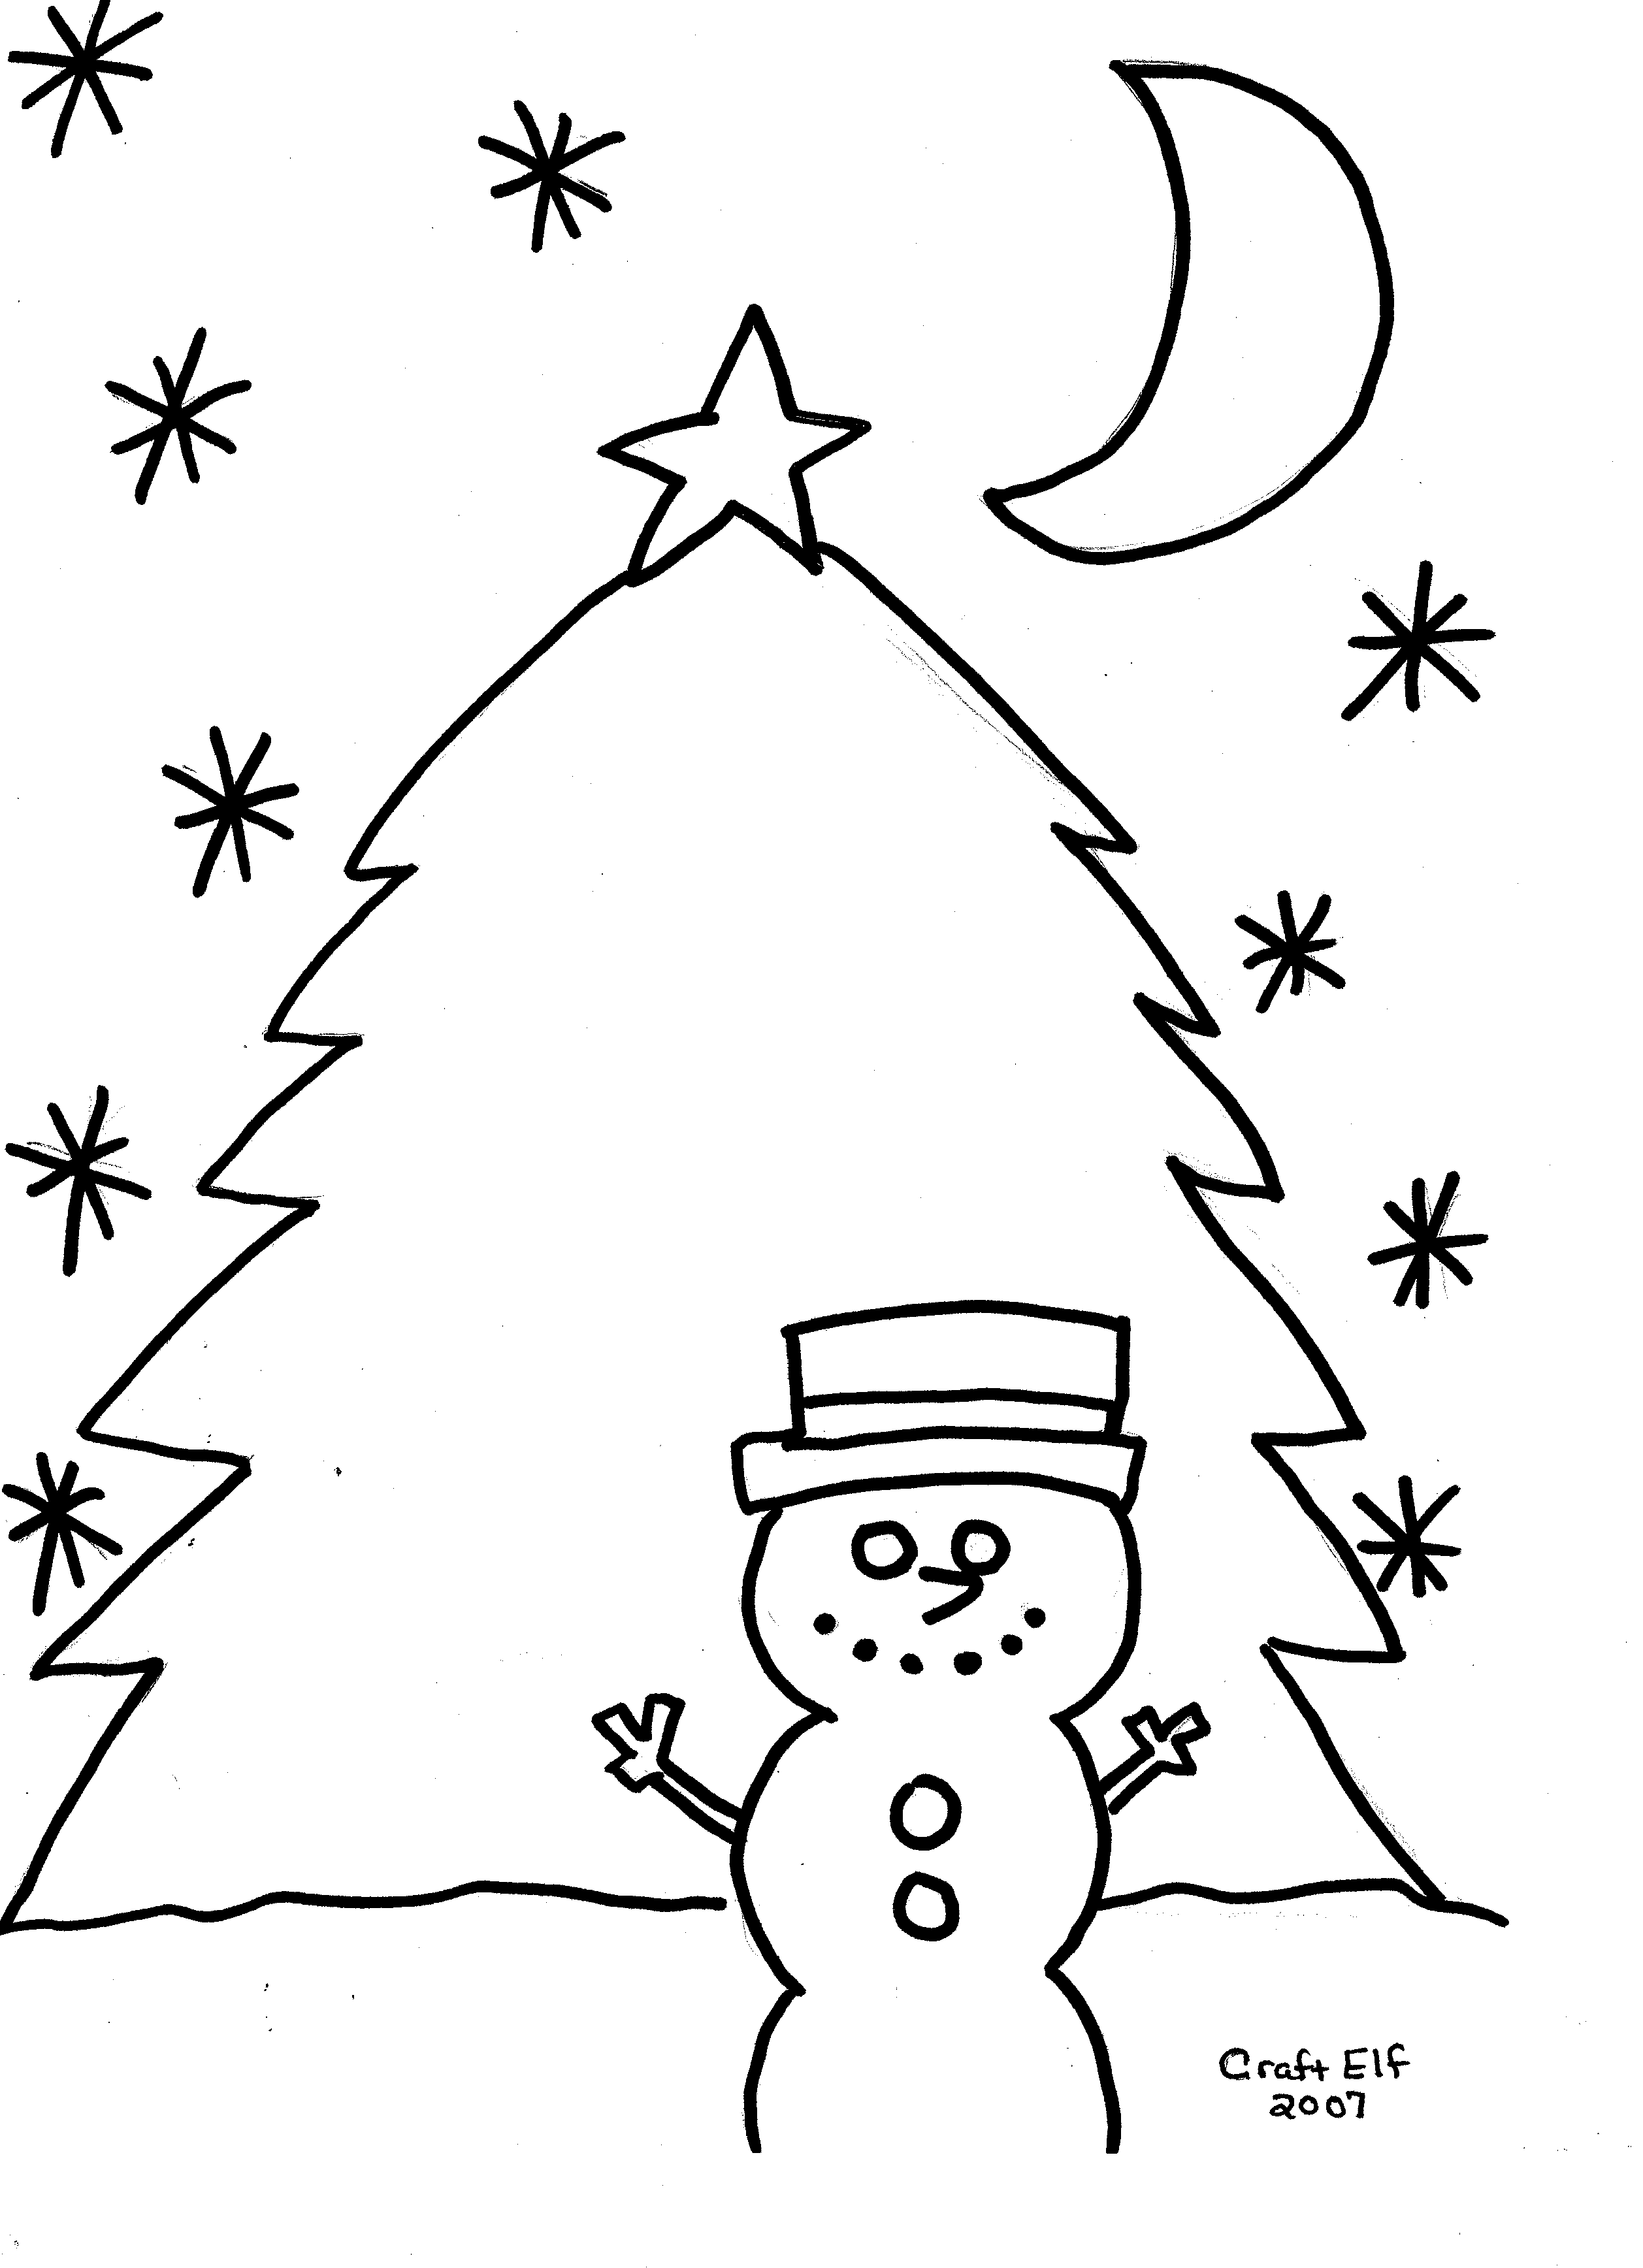 free coloring page snowman & Christmas tree